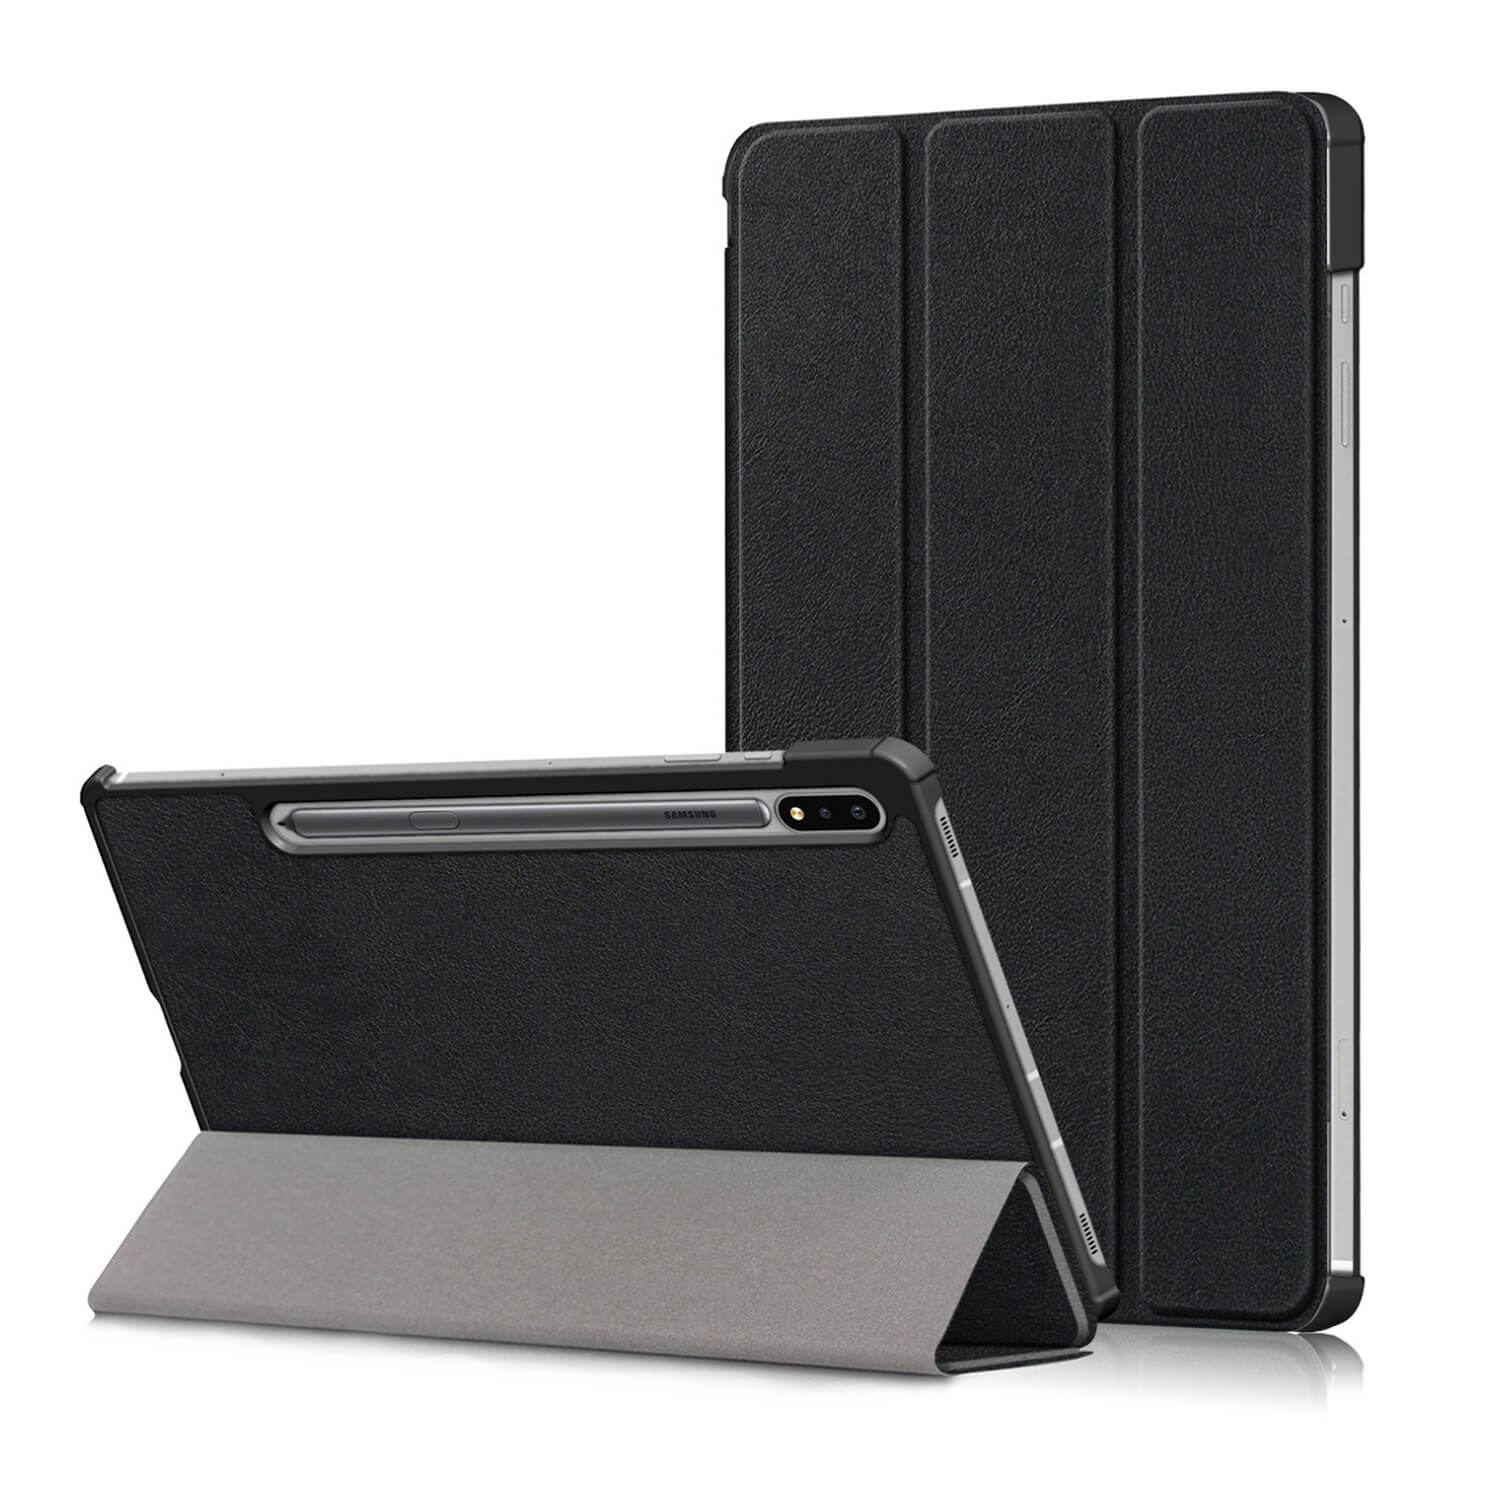 Tough on Samsung Galaxy Tab S8 / S7 Case Smart Cover Black